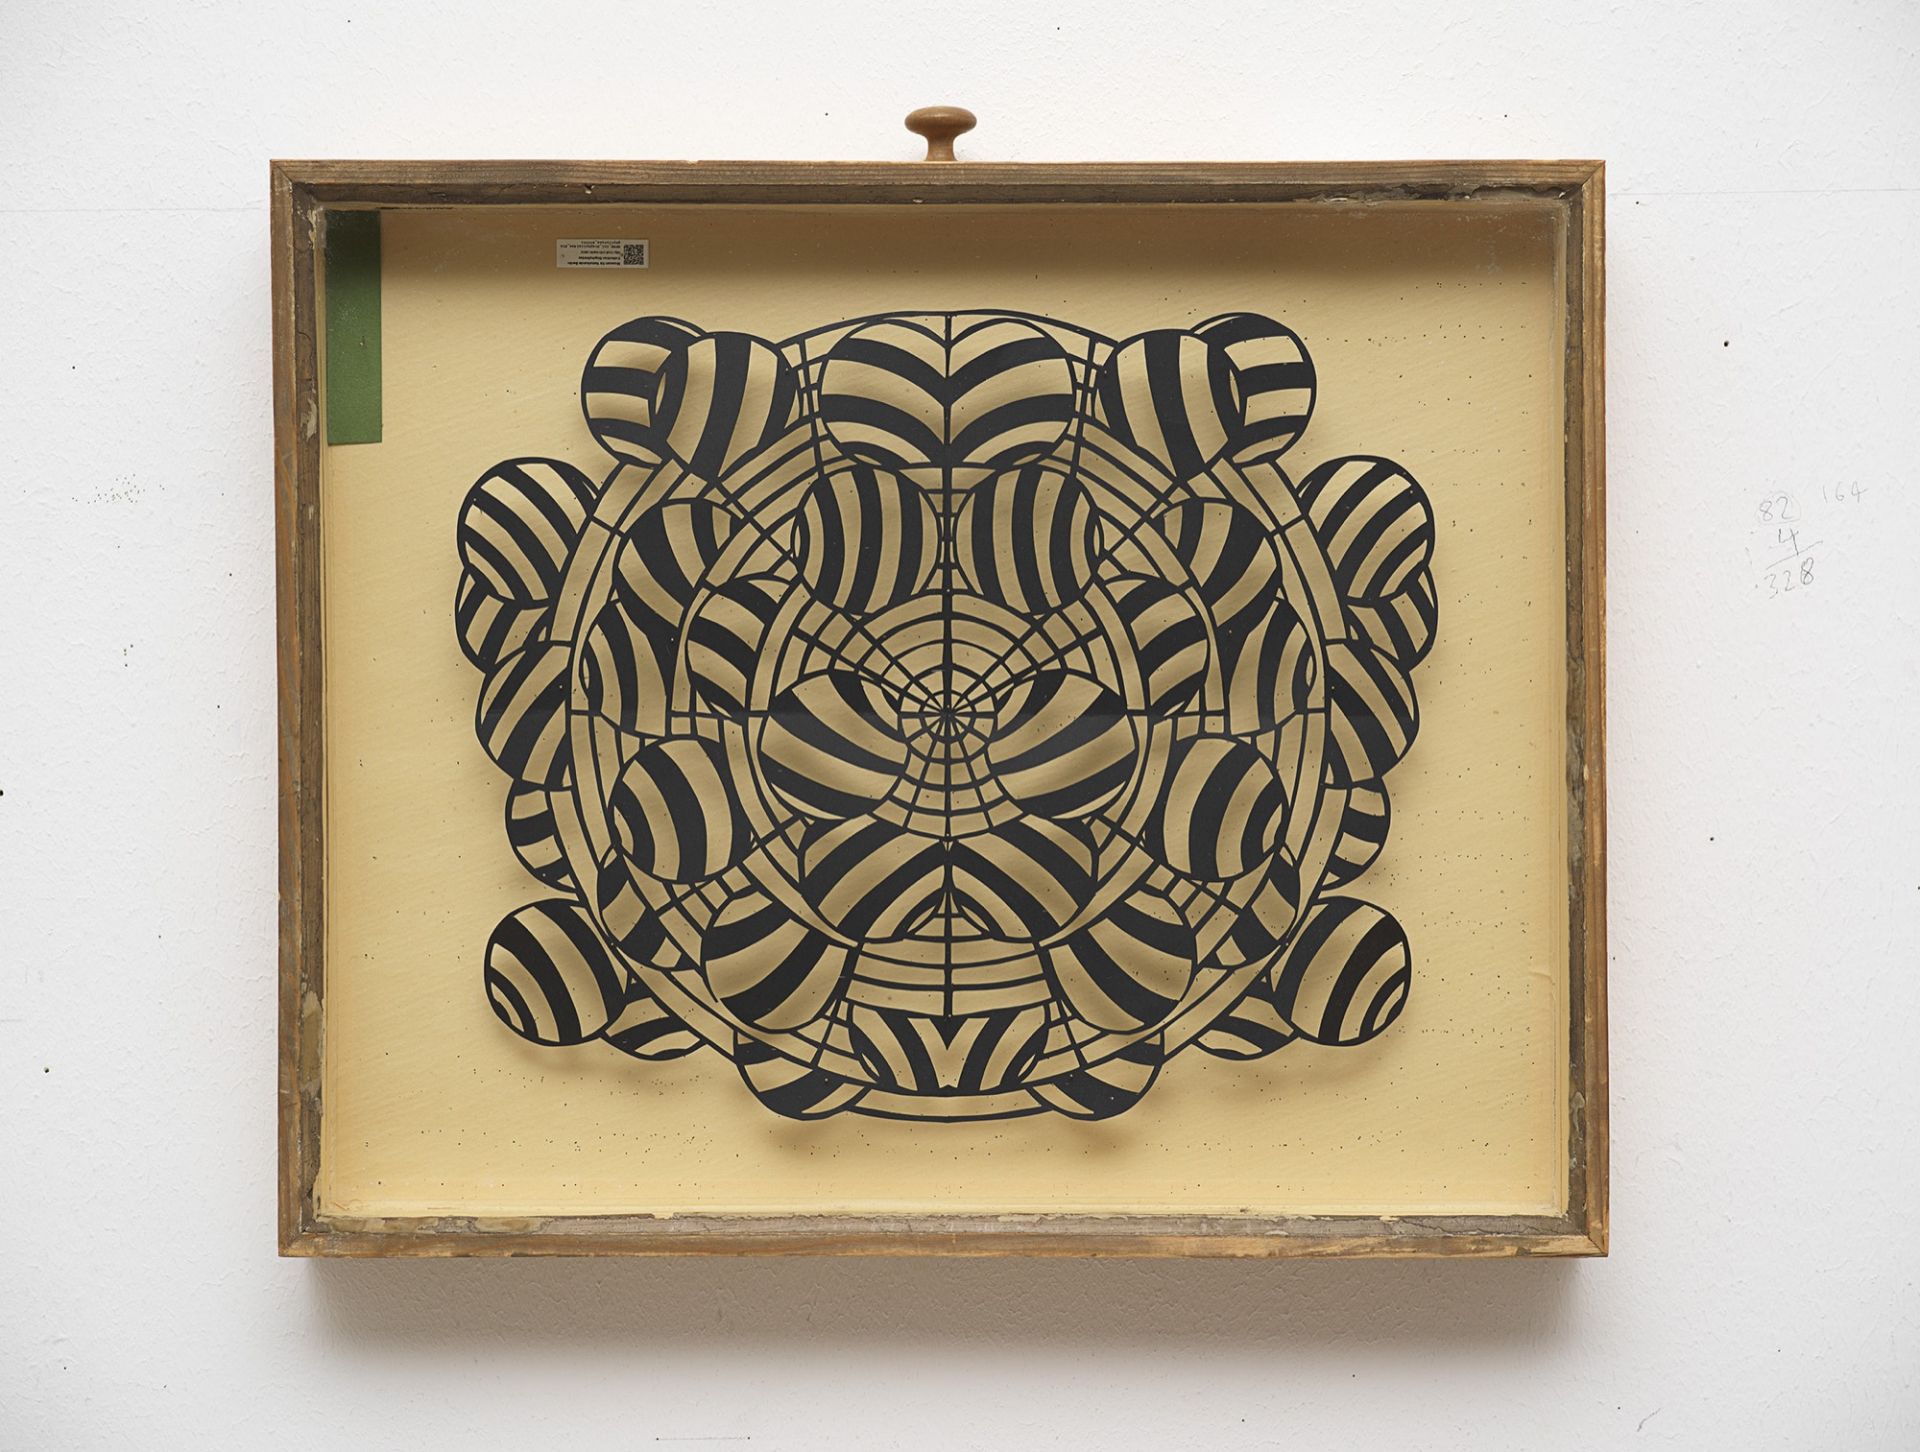 Deborah Wargon: Insect Box from The Paper Diaries (2015/2016)